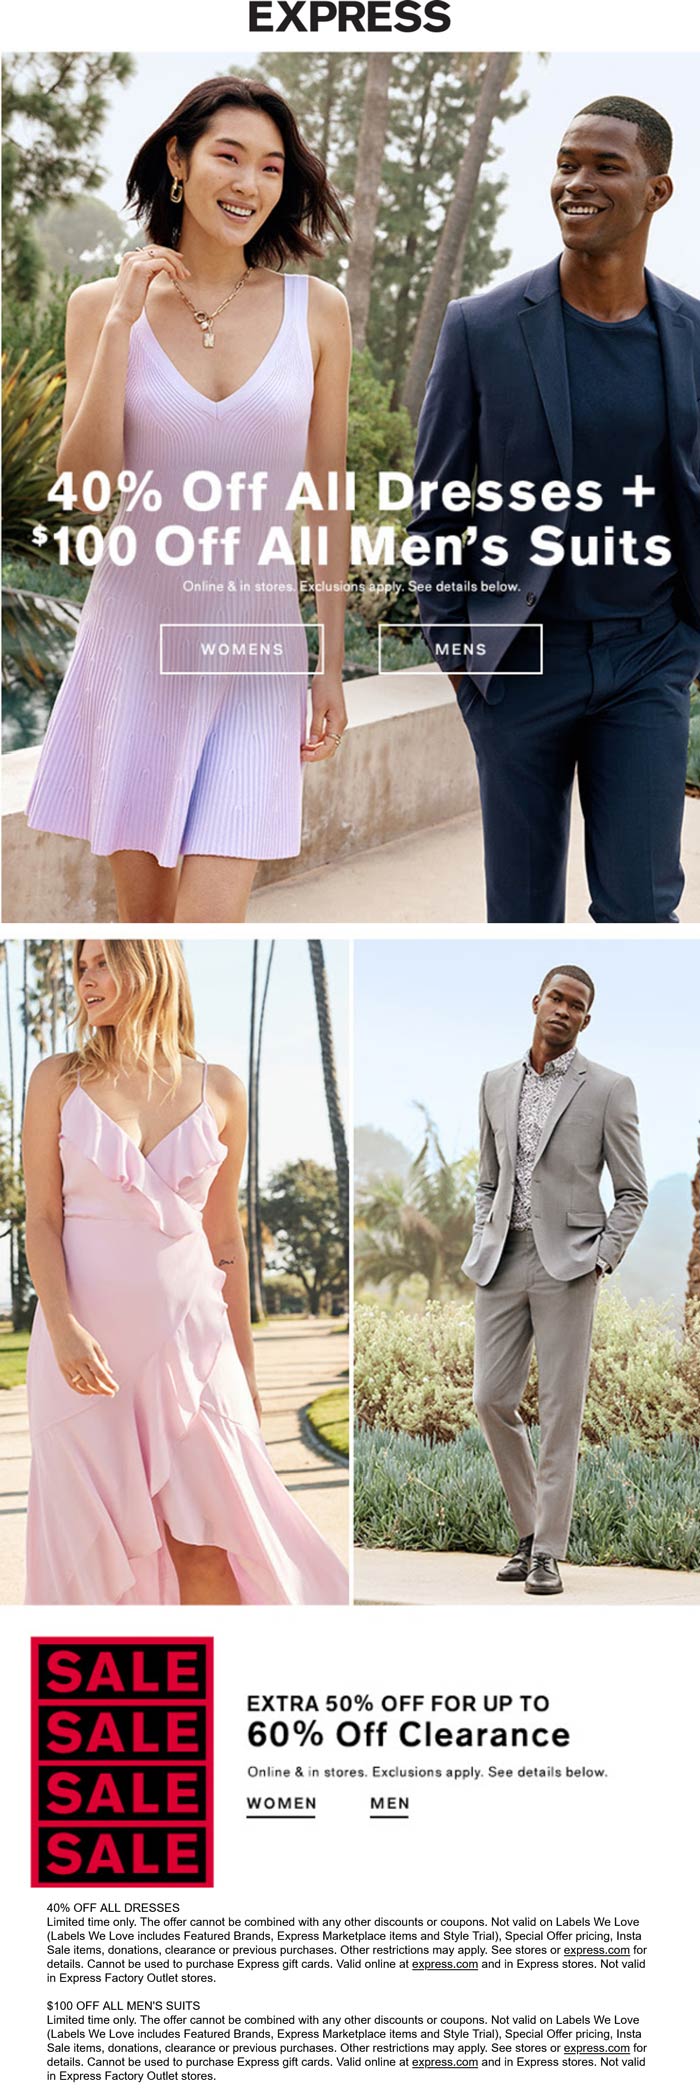 Express stores Coupon  40% off all dresses & $100 off mens suits today at Express #express 